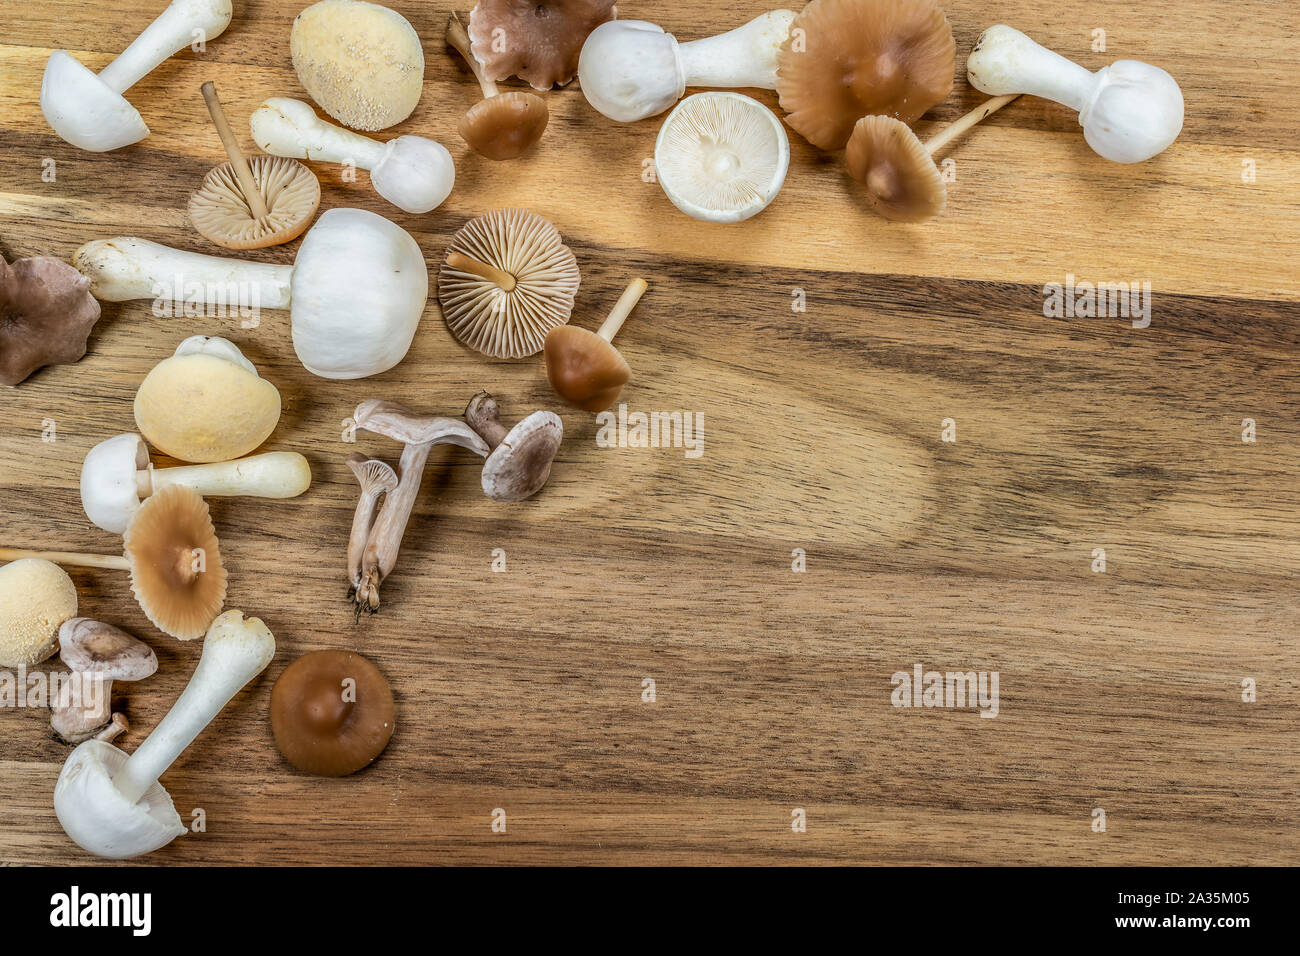 A group of different edible and poisonous mushrooms from the garden lawn. Autumn background. Stock Photo